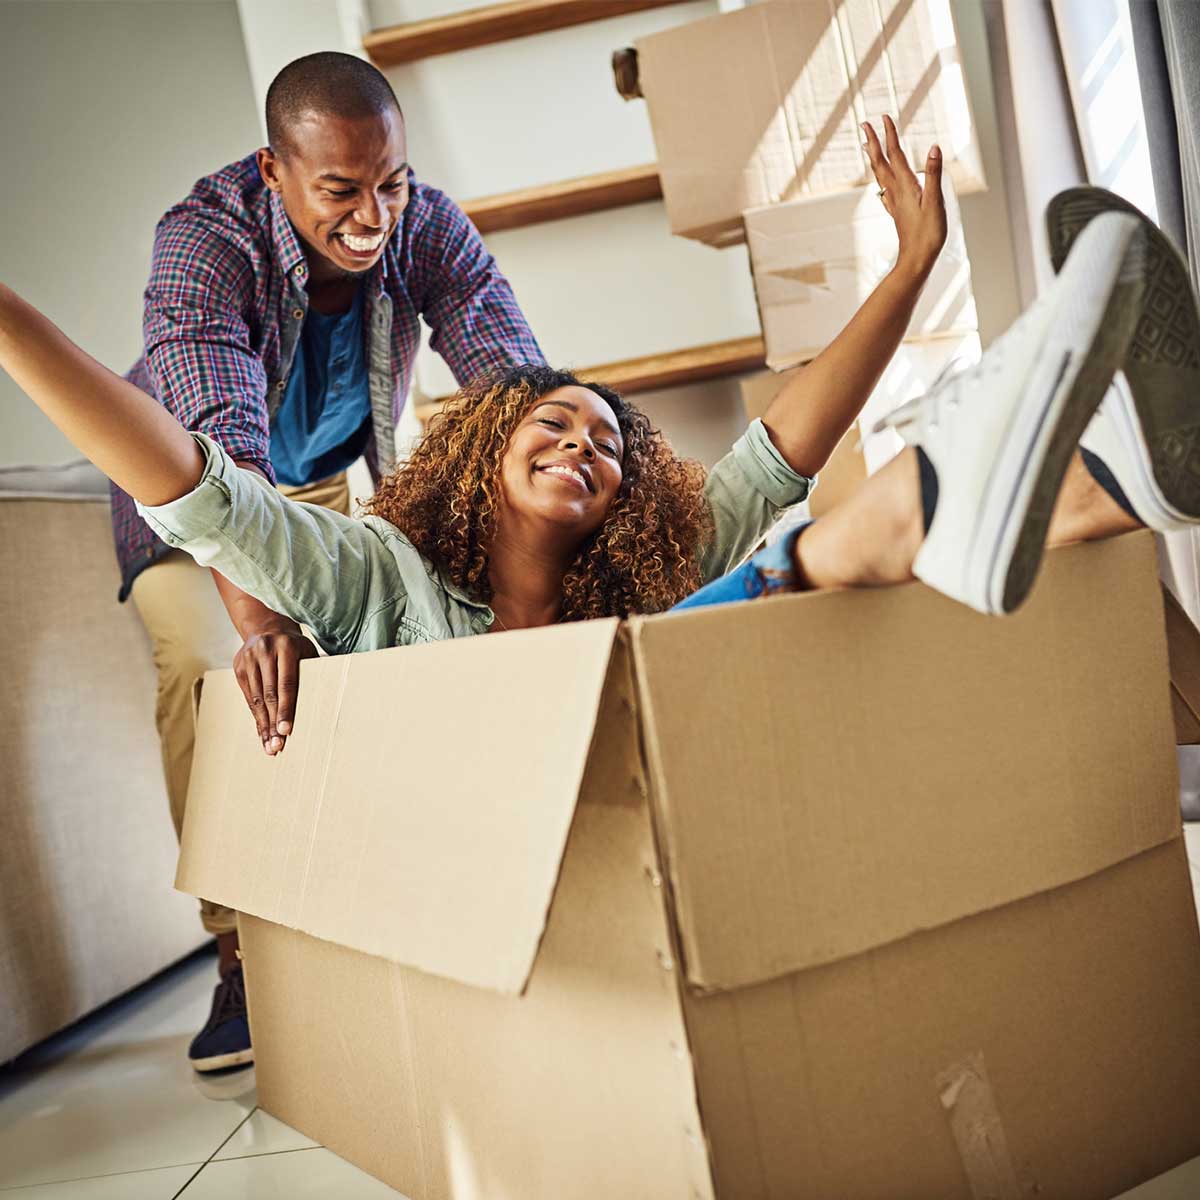 Cheerful young woman inside of a box with her partner pushing the box inside an apartment